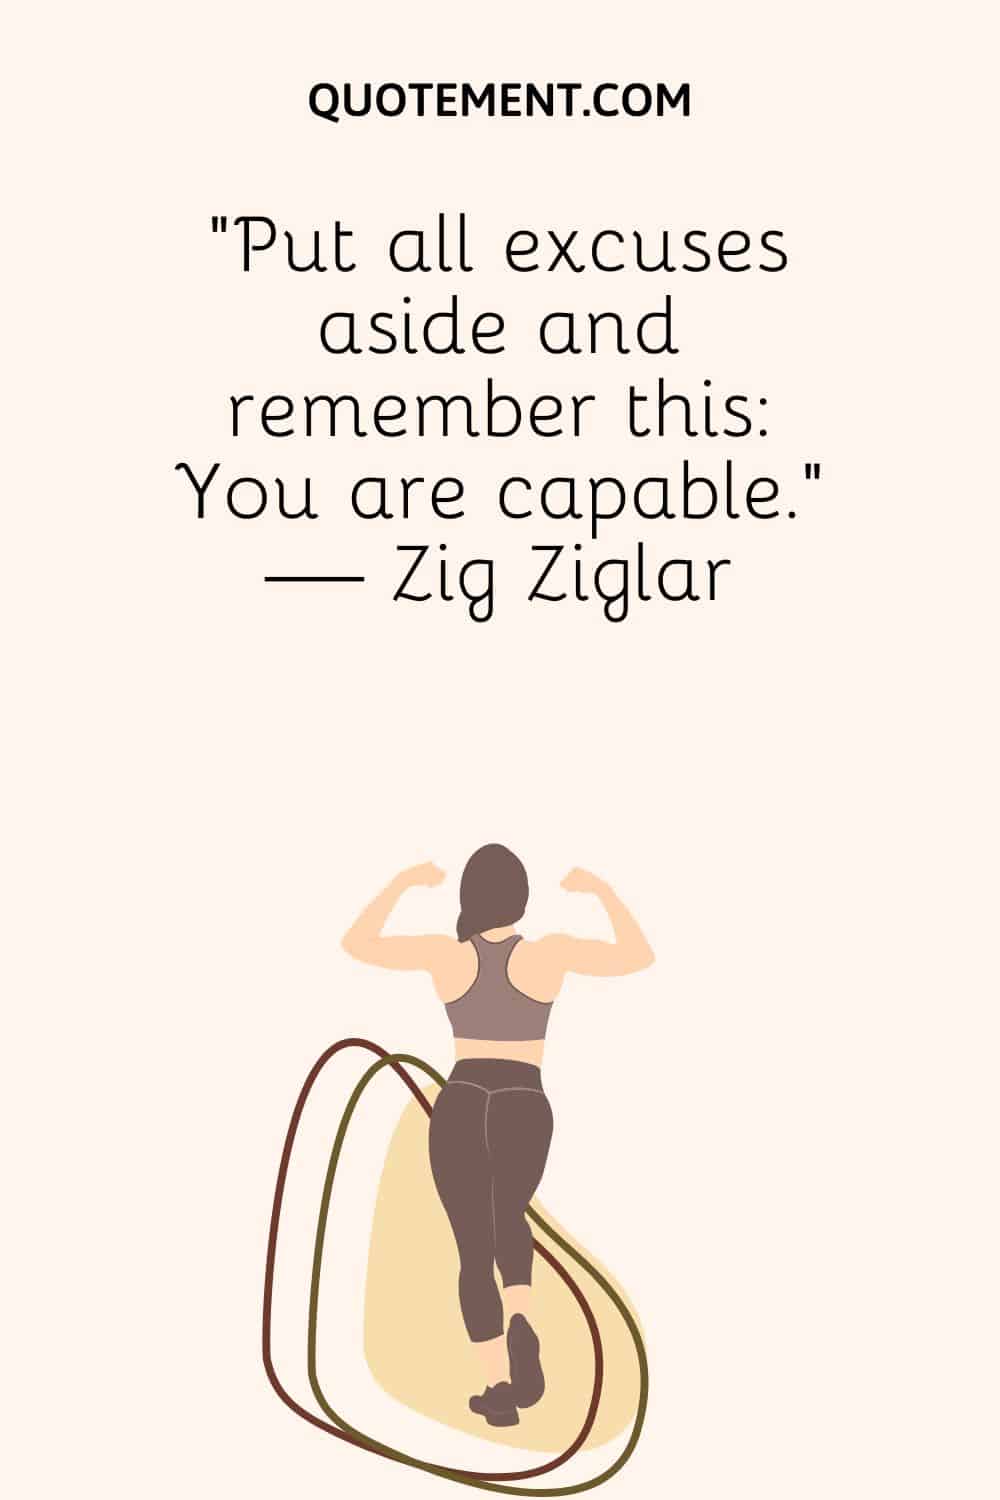 “Put all excuses aside and remember this You are capable.” — Zig Ziglar